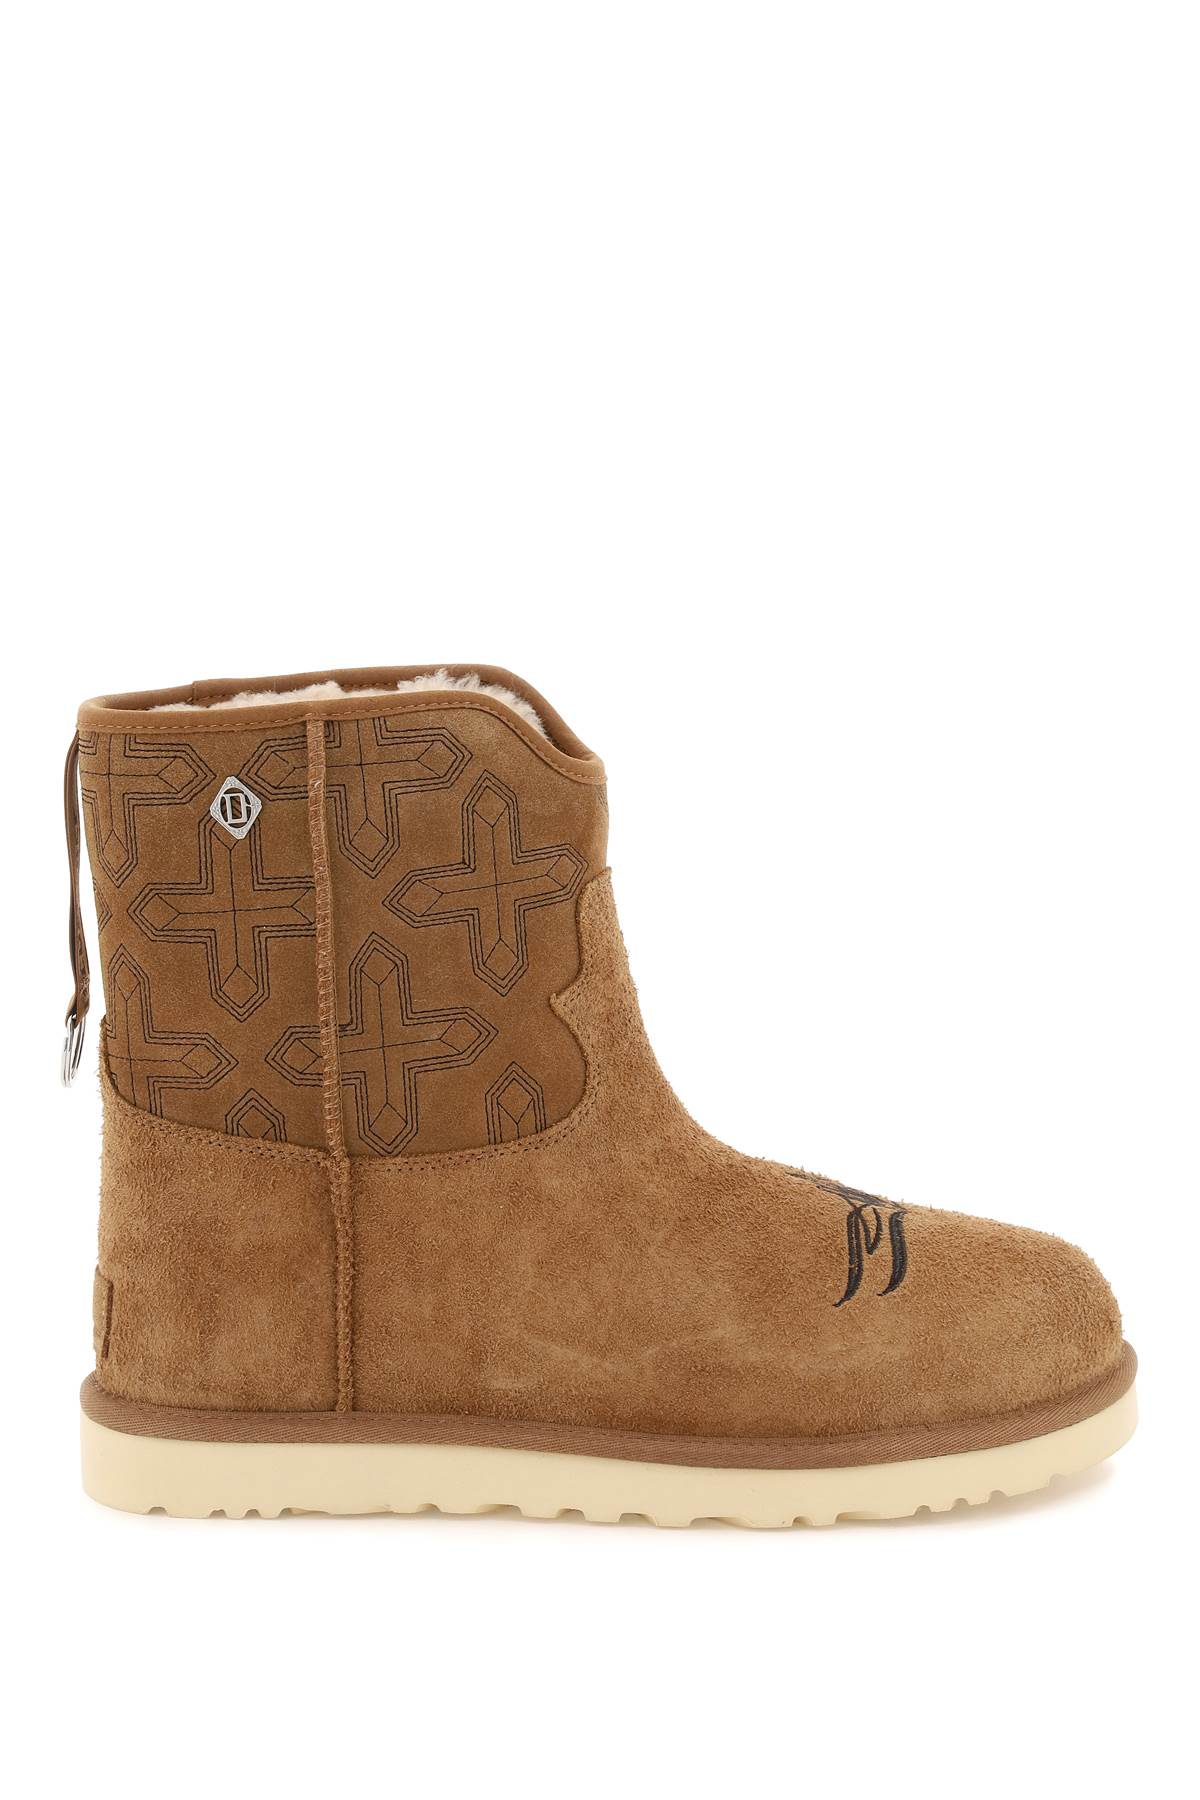 Children of the Discordance Ugg X Cotd Classic Short Boots